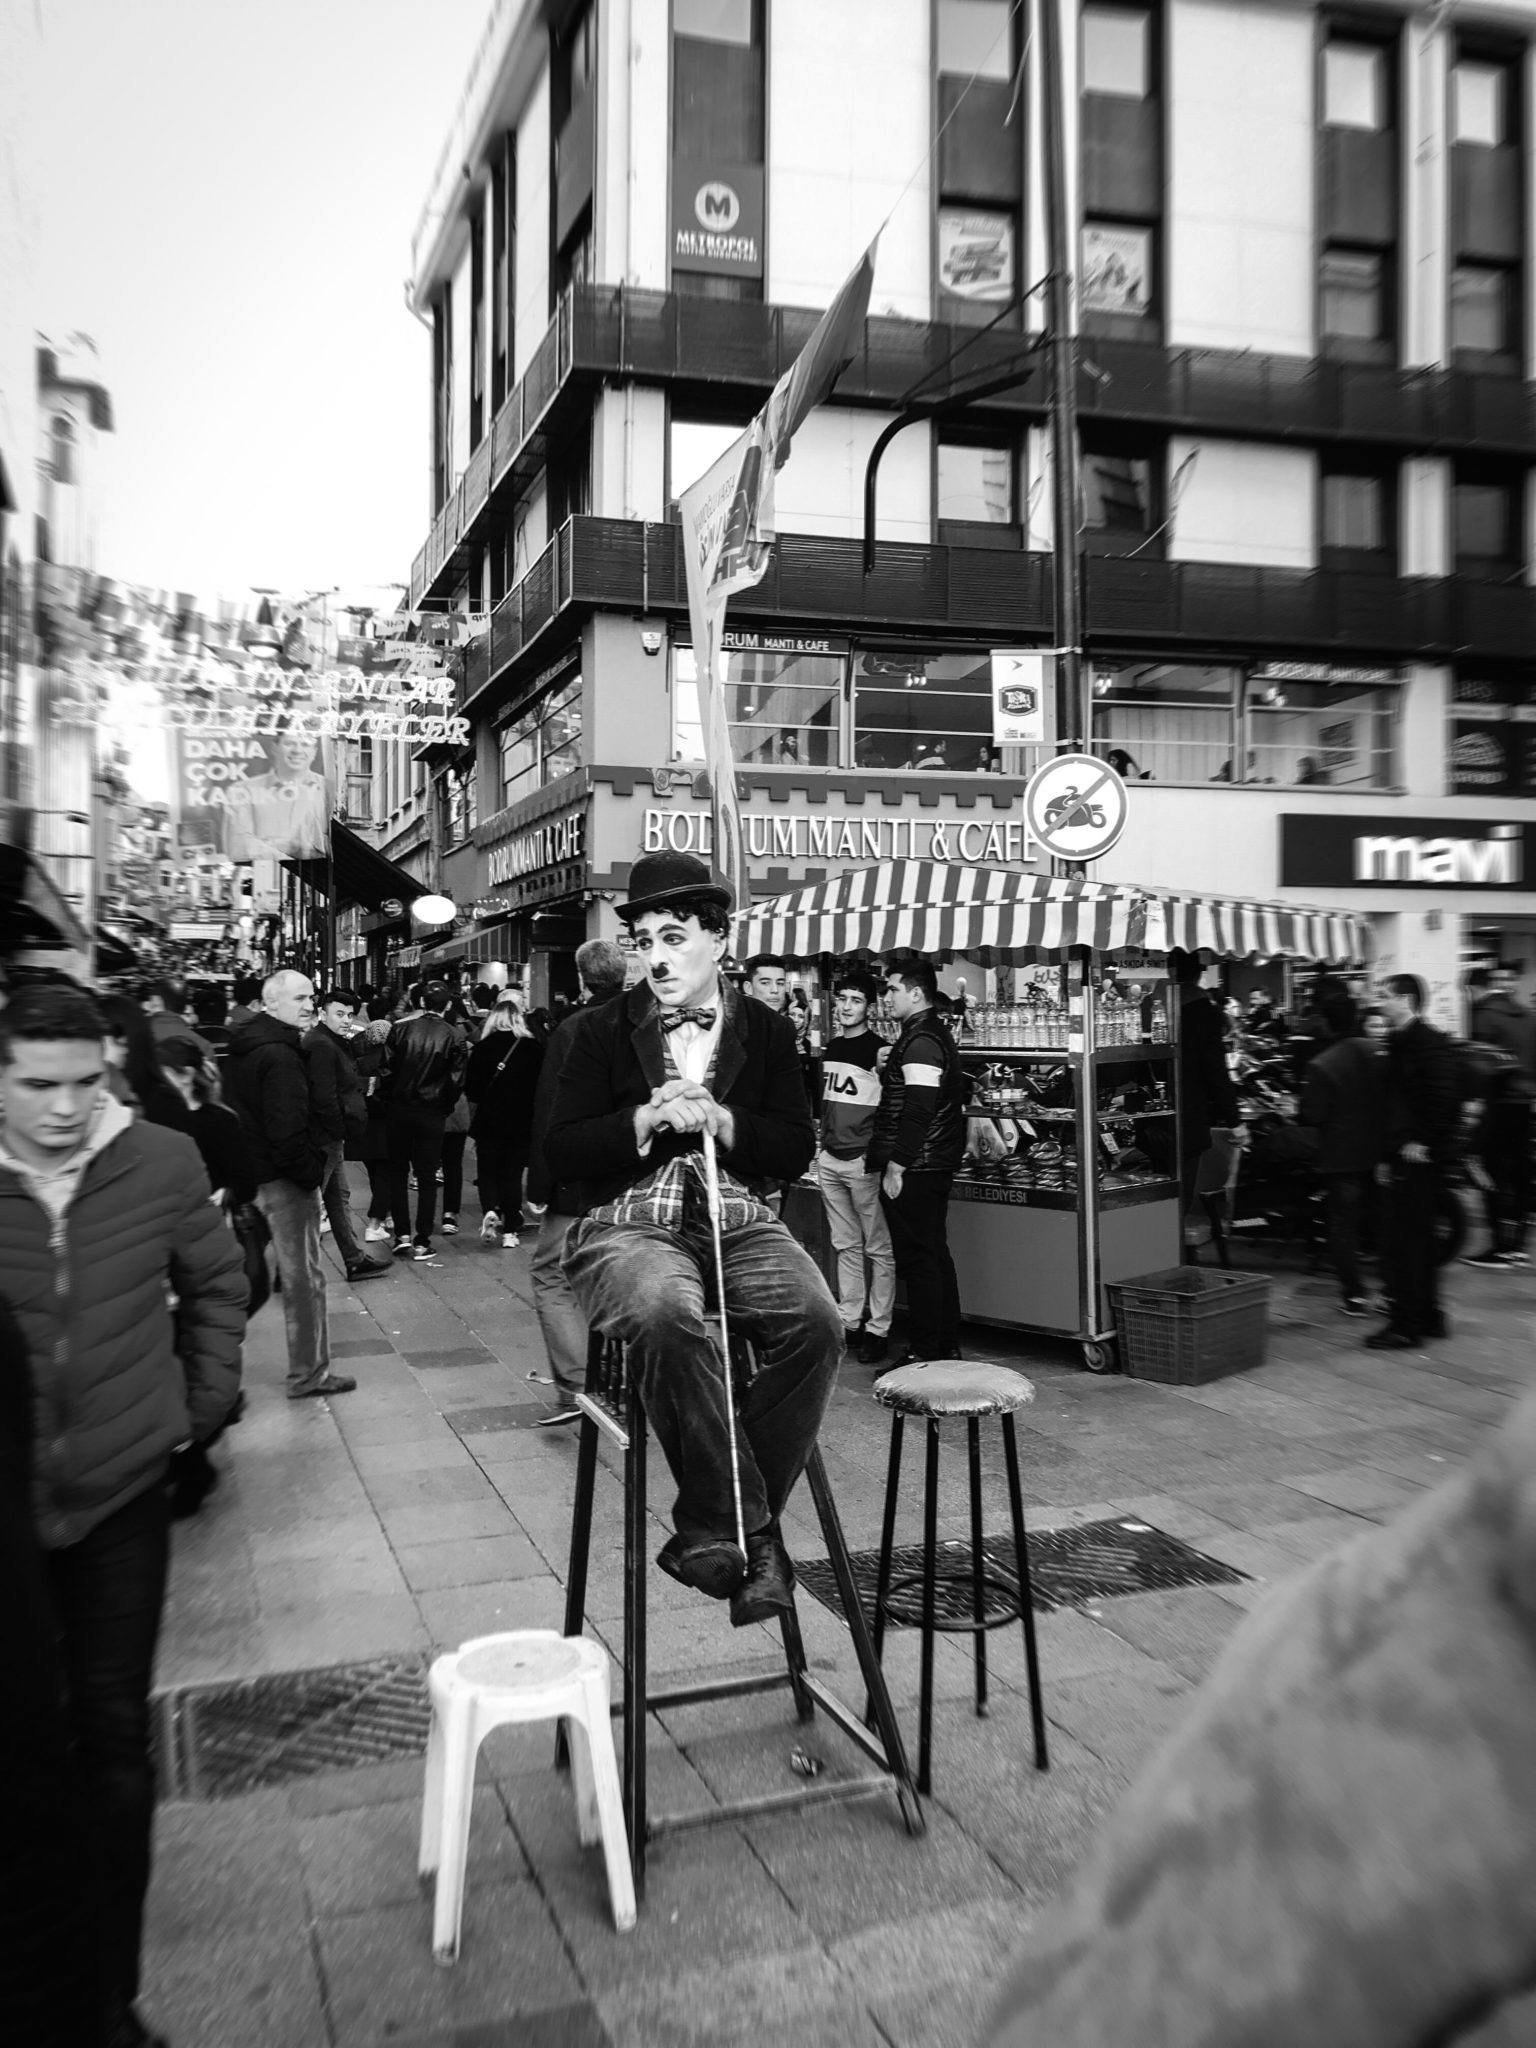 Charlie Chaplin impersonator sitting on a stool in a public market